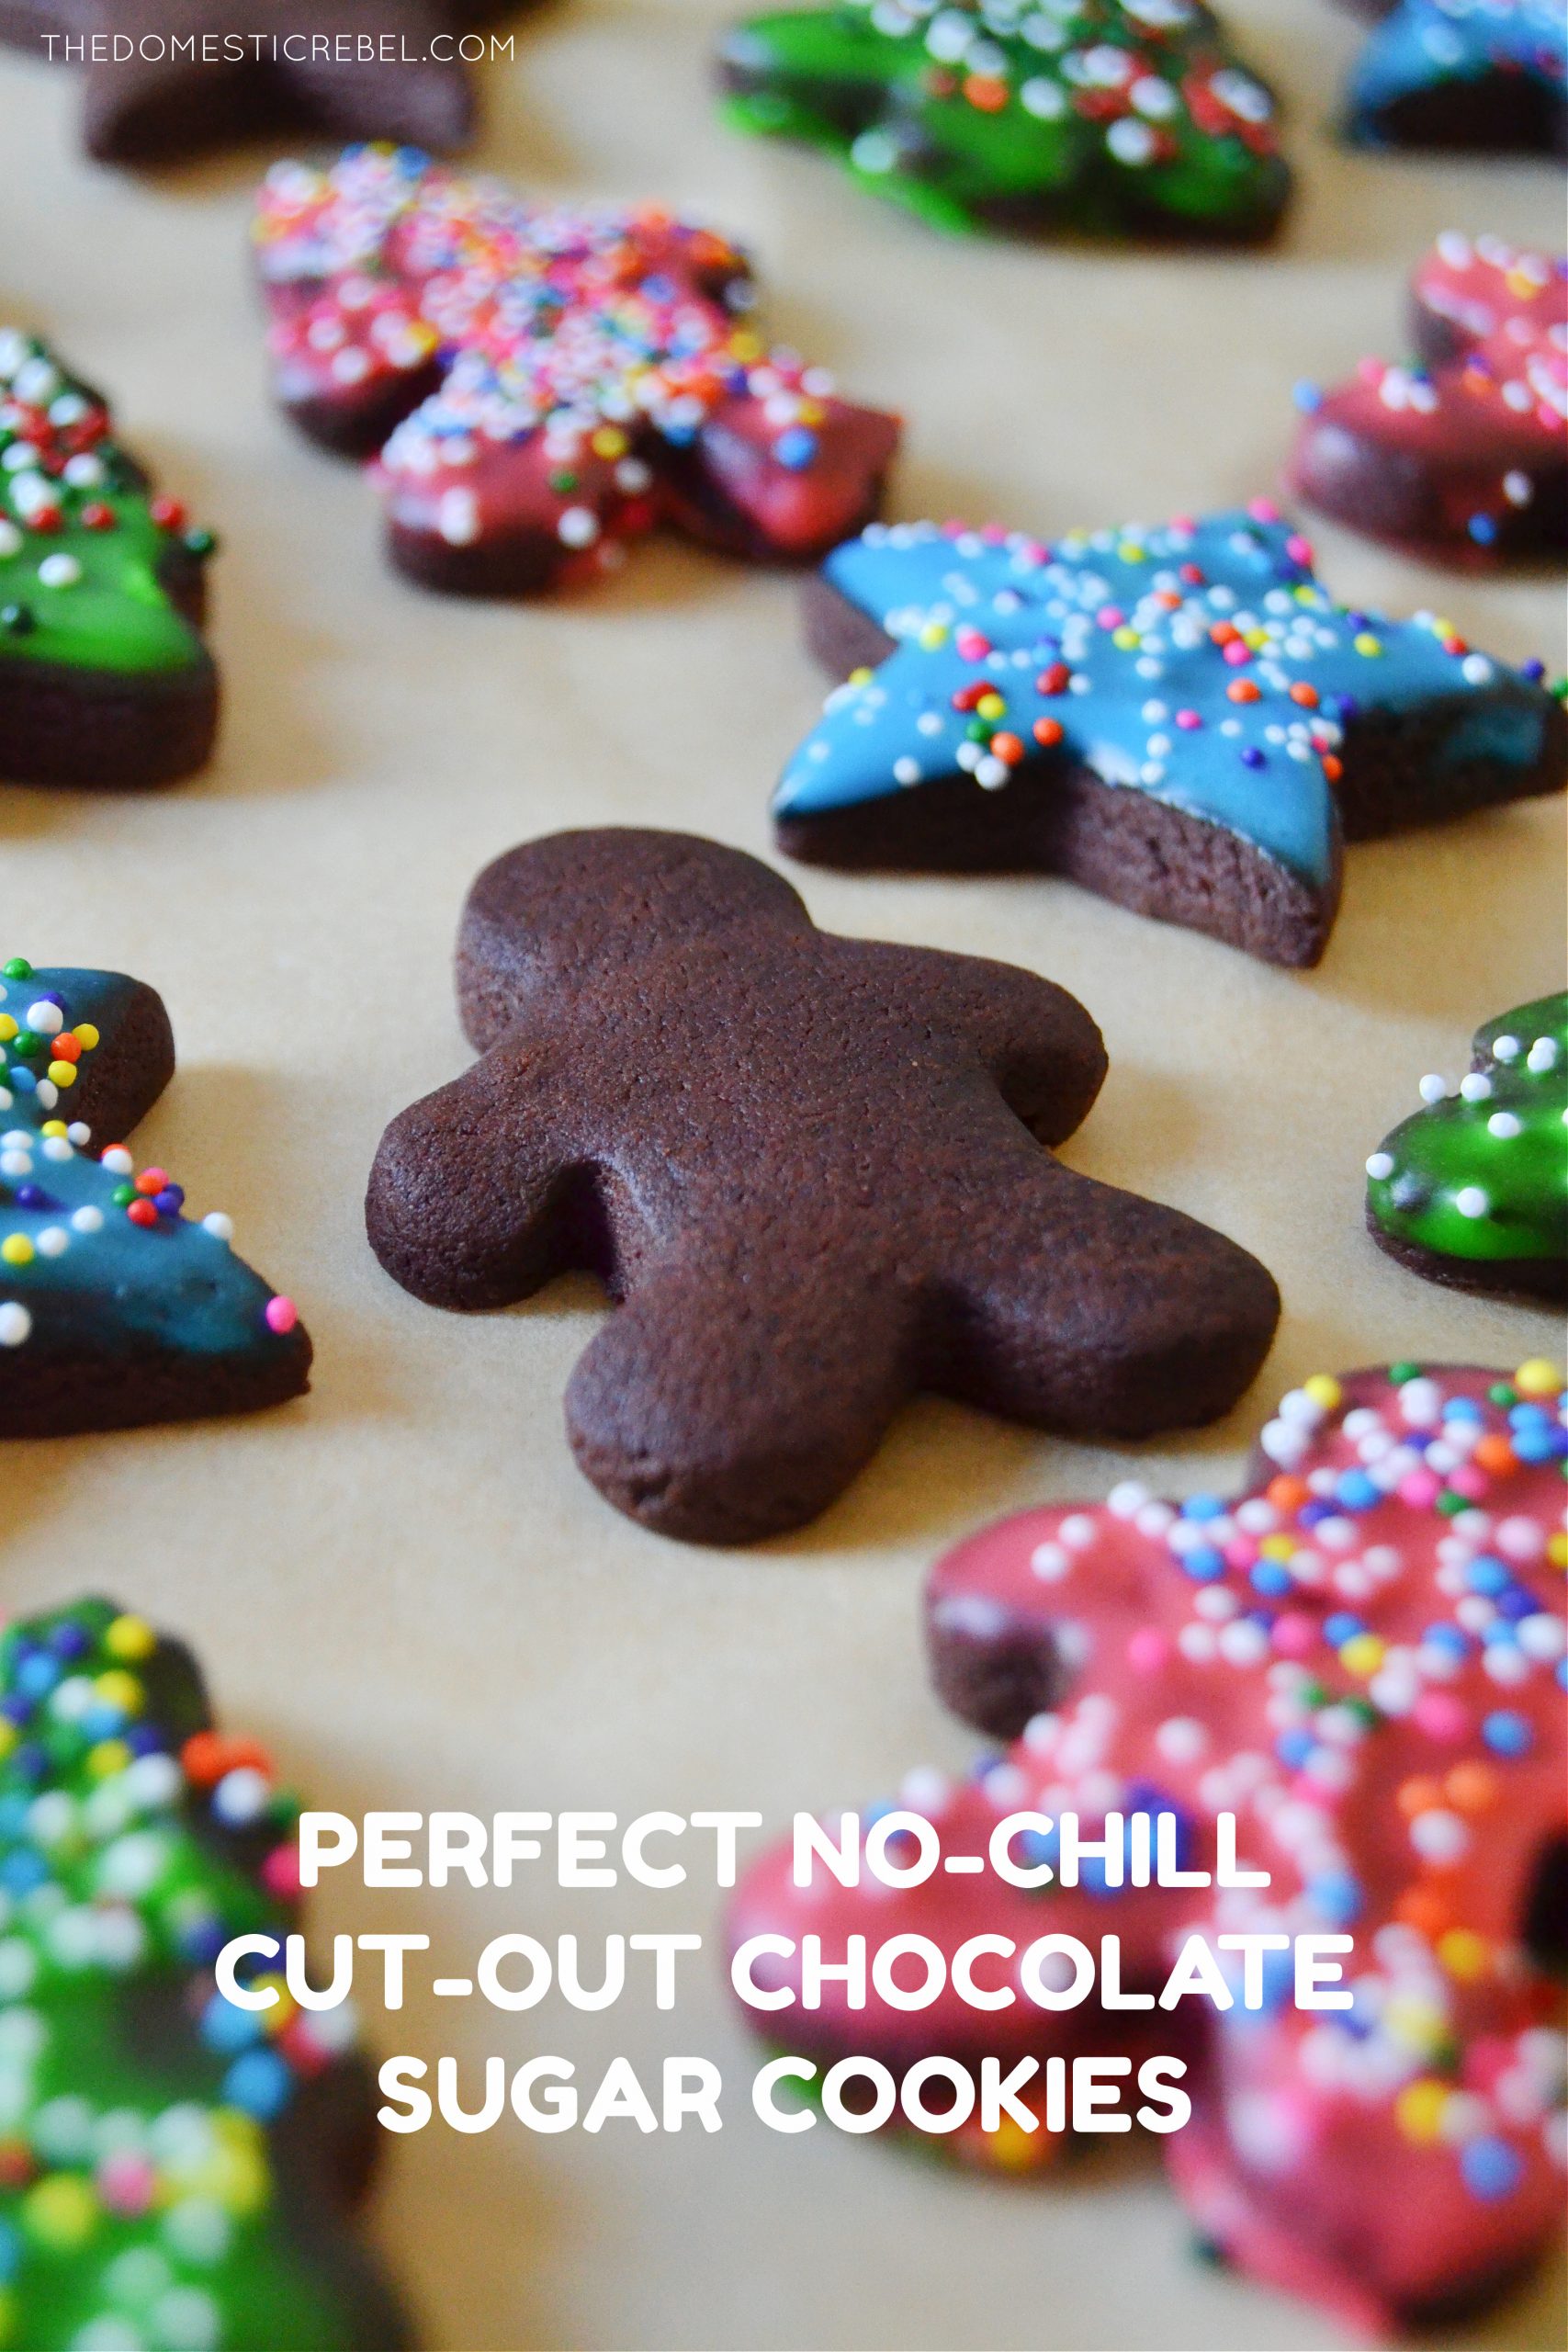 Perfect No-Chill Chocolate Cut-Out Sugar Cookies | The Domestic Rebel